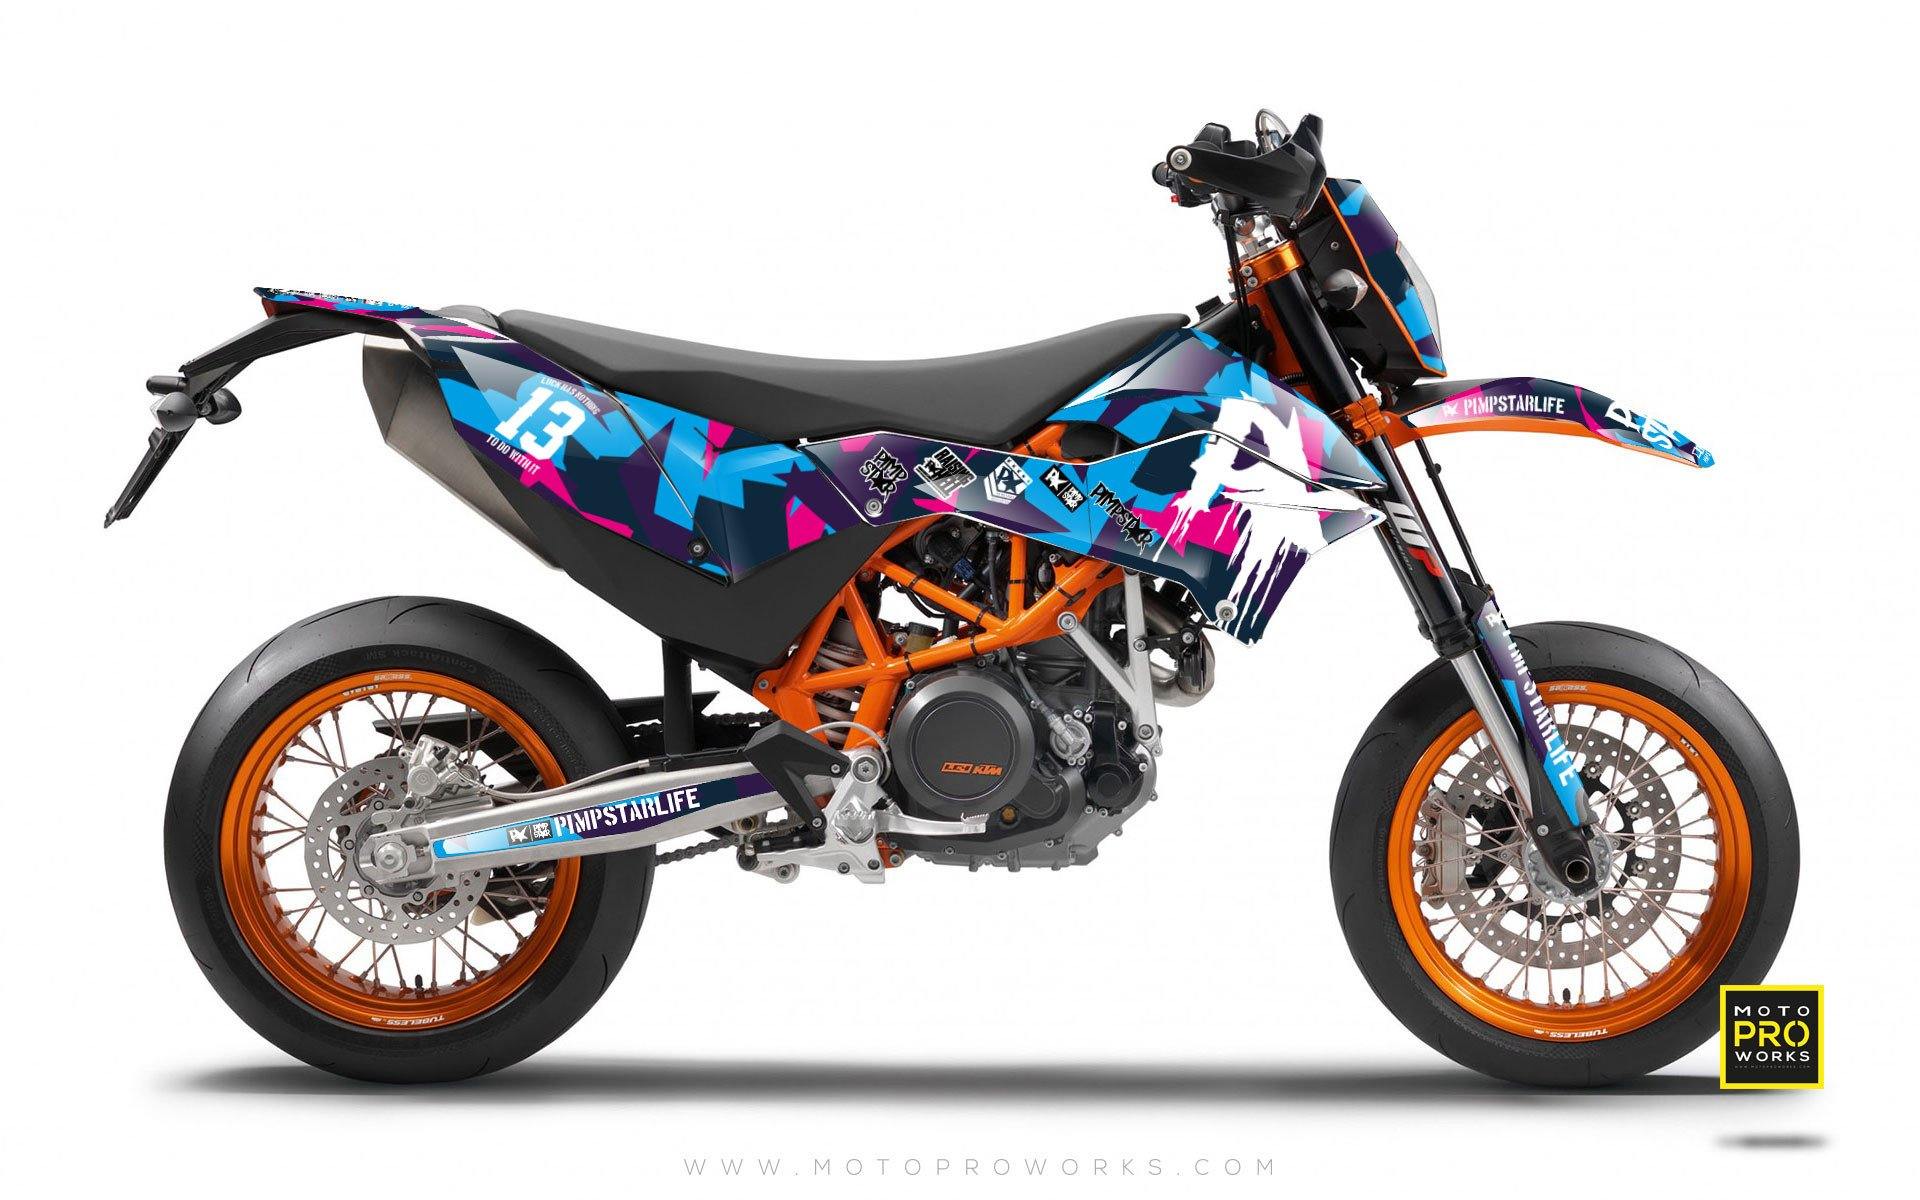 KTM GRAPHIC KIT - "M90" (candy) - MotoProWorks | Decals and Bike Graphic kit